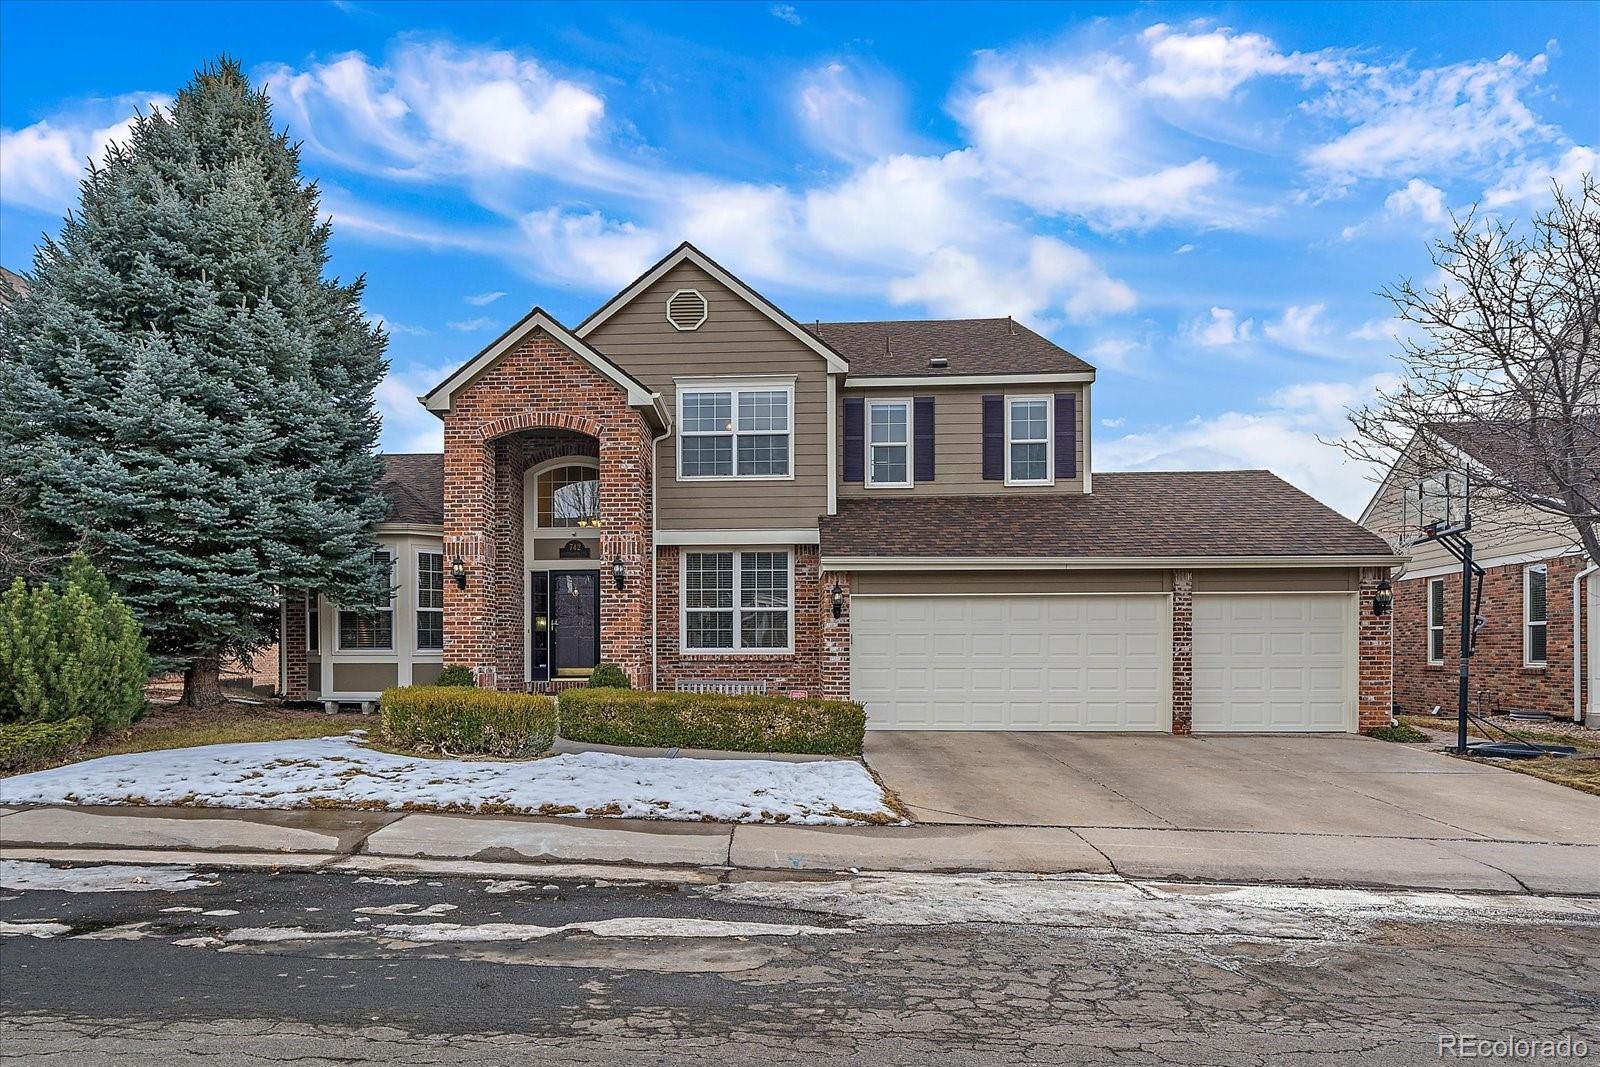 742  Countrybriar Lane, highlands ranch MLS: 3960944 Beds: 5 Baths: 5 Price: $1,350,000